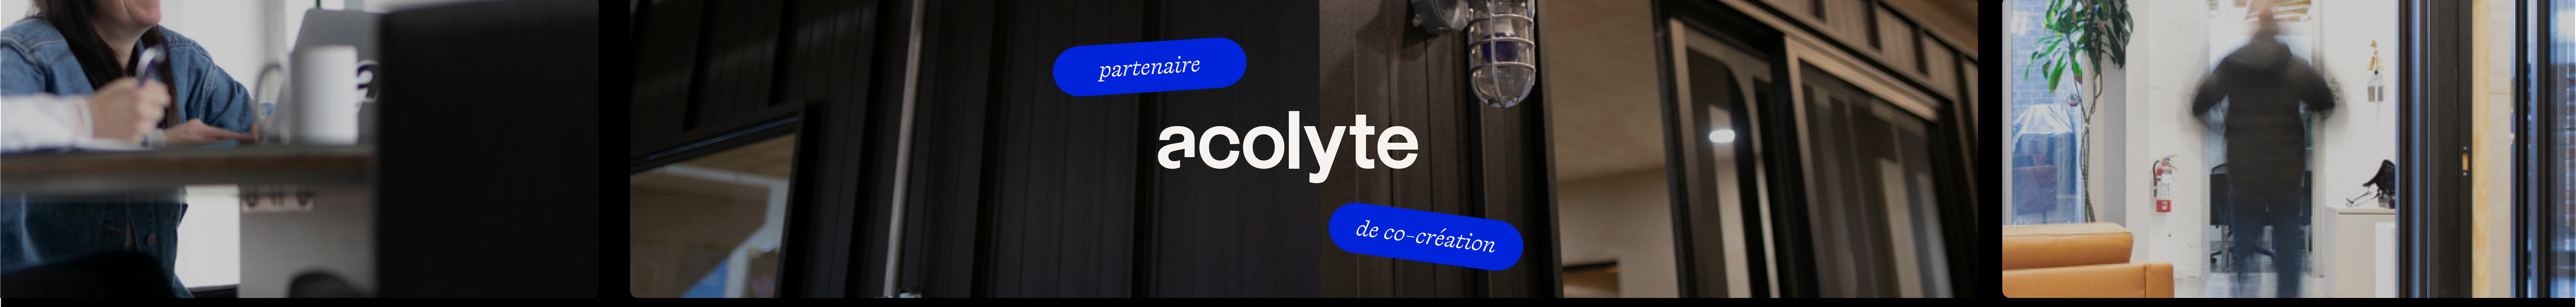 Acolyte ‍'s profile banner